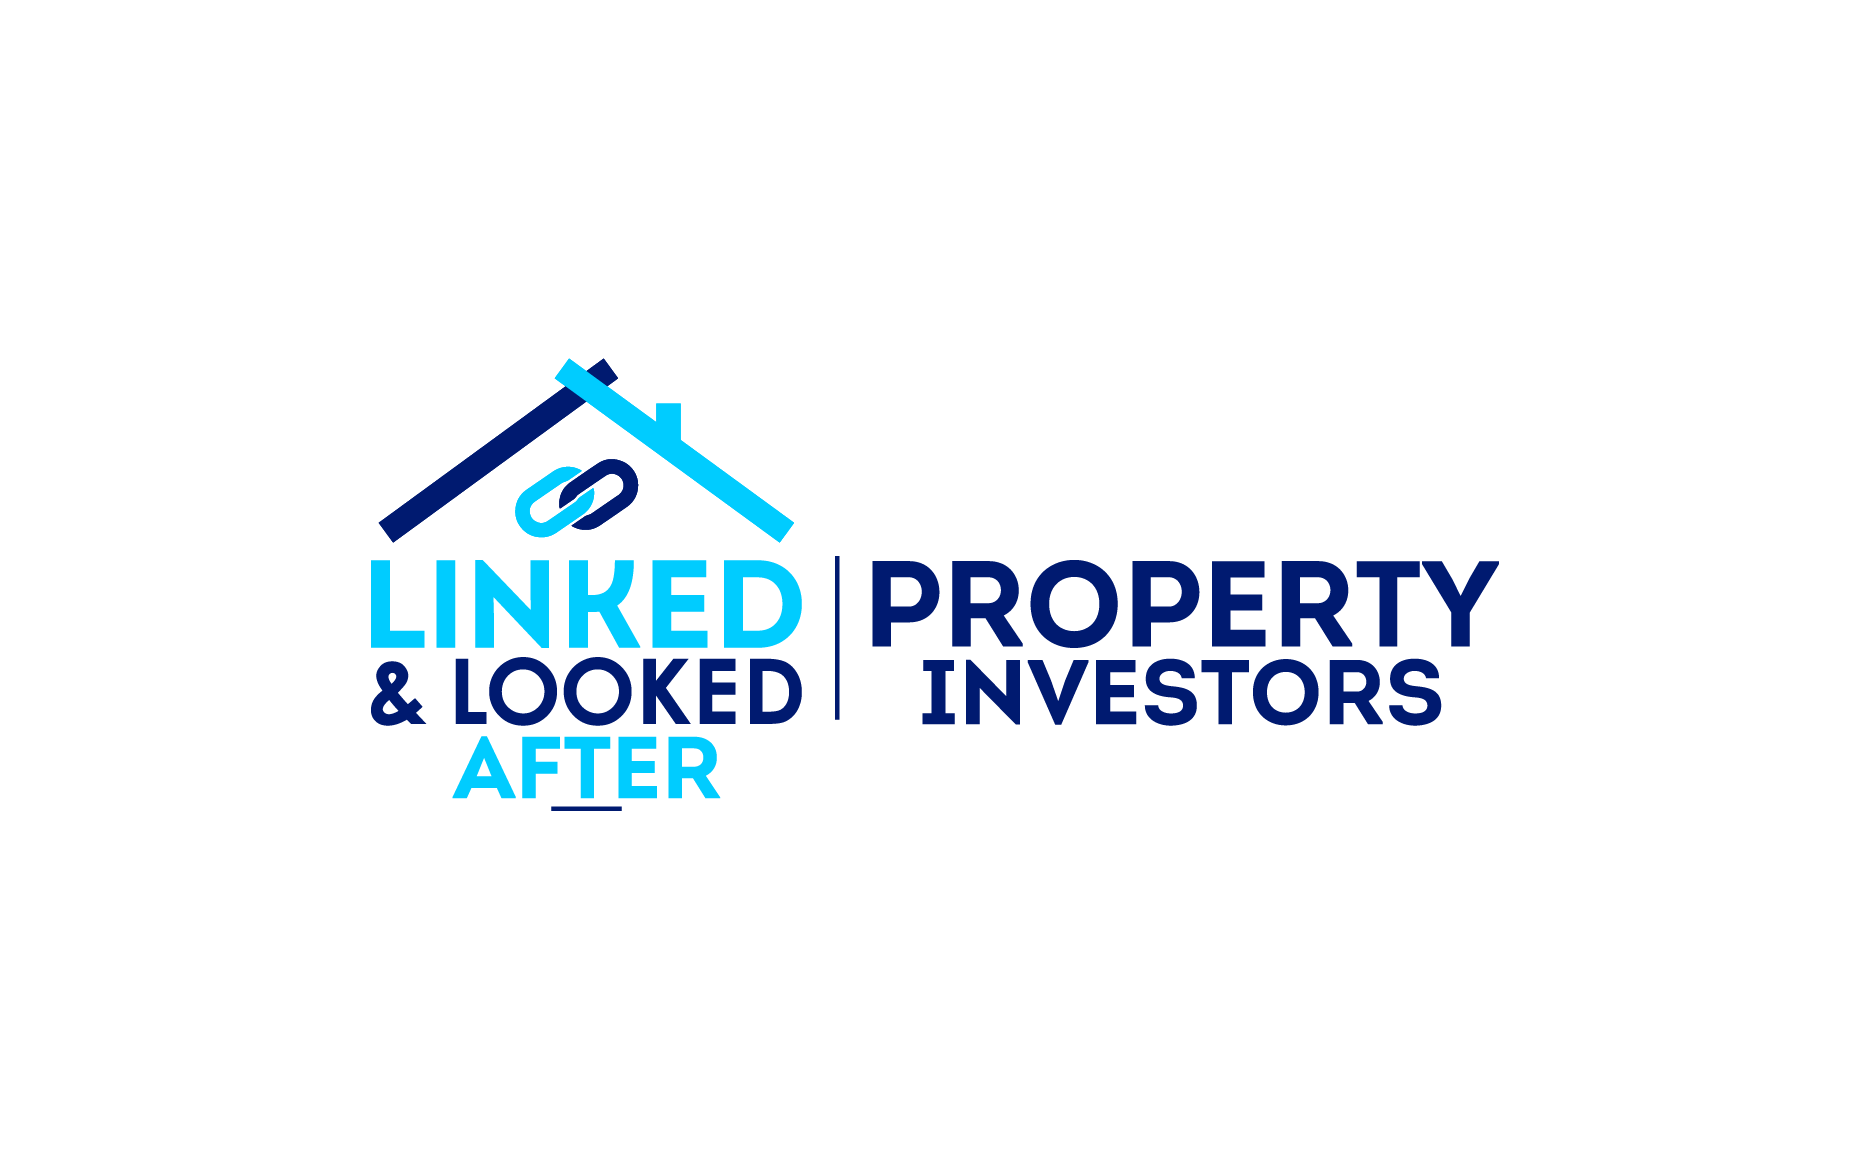 Linked & Looked After Property Investors